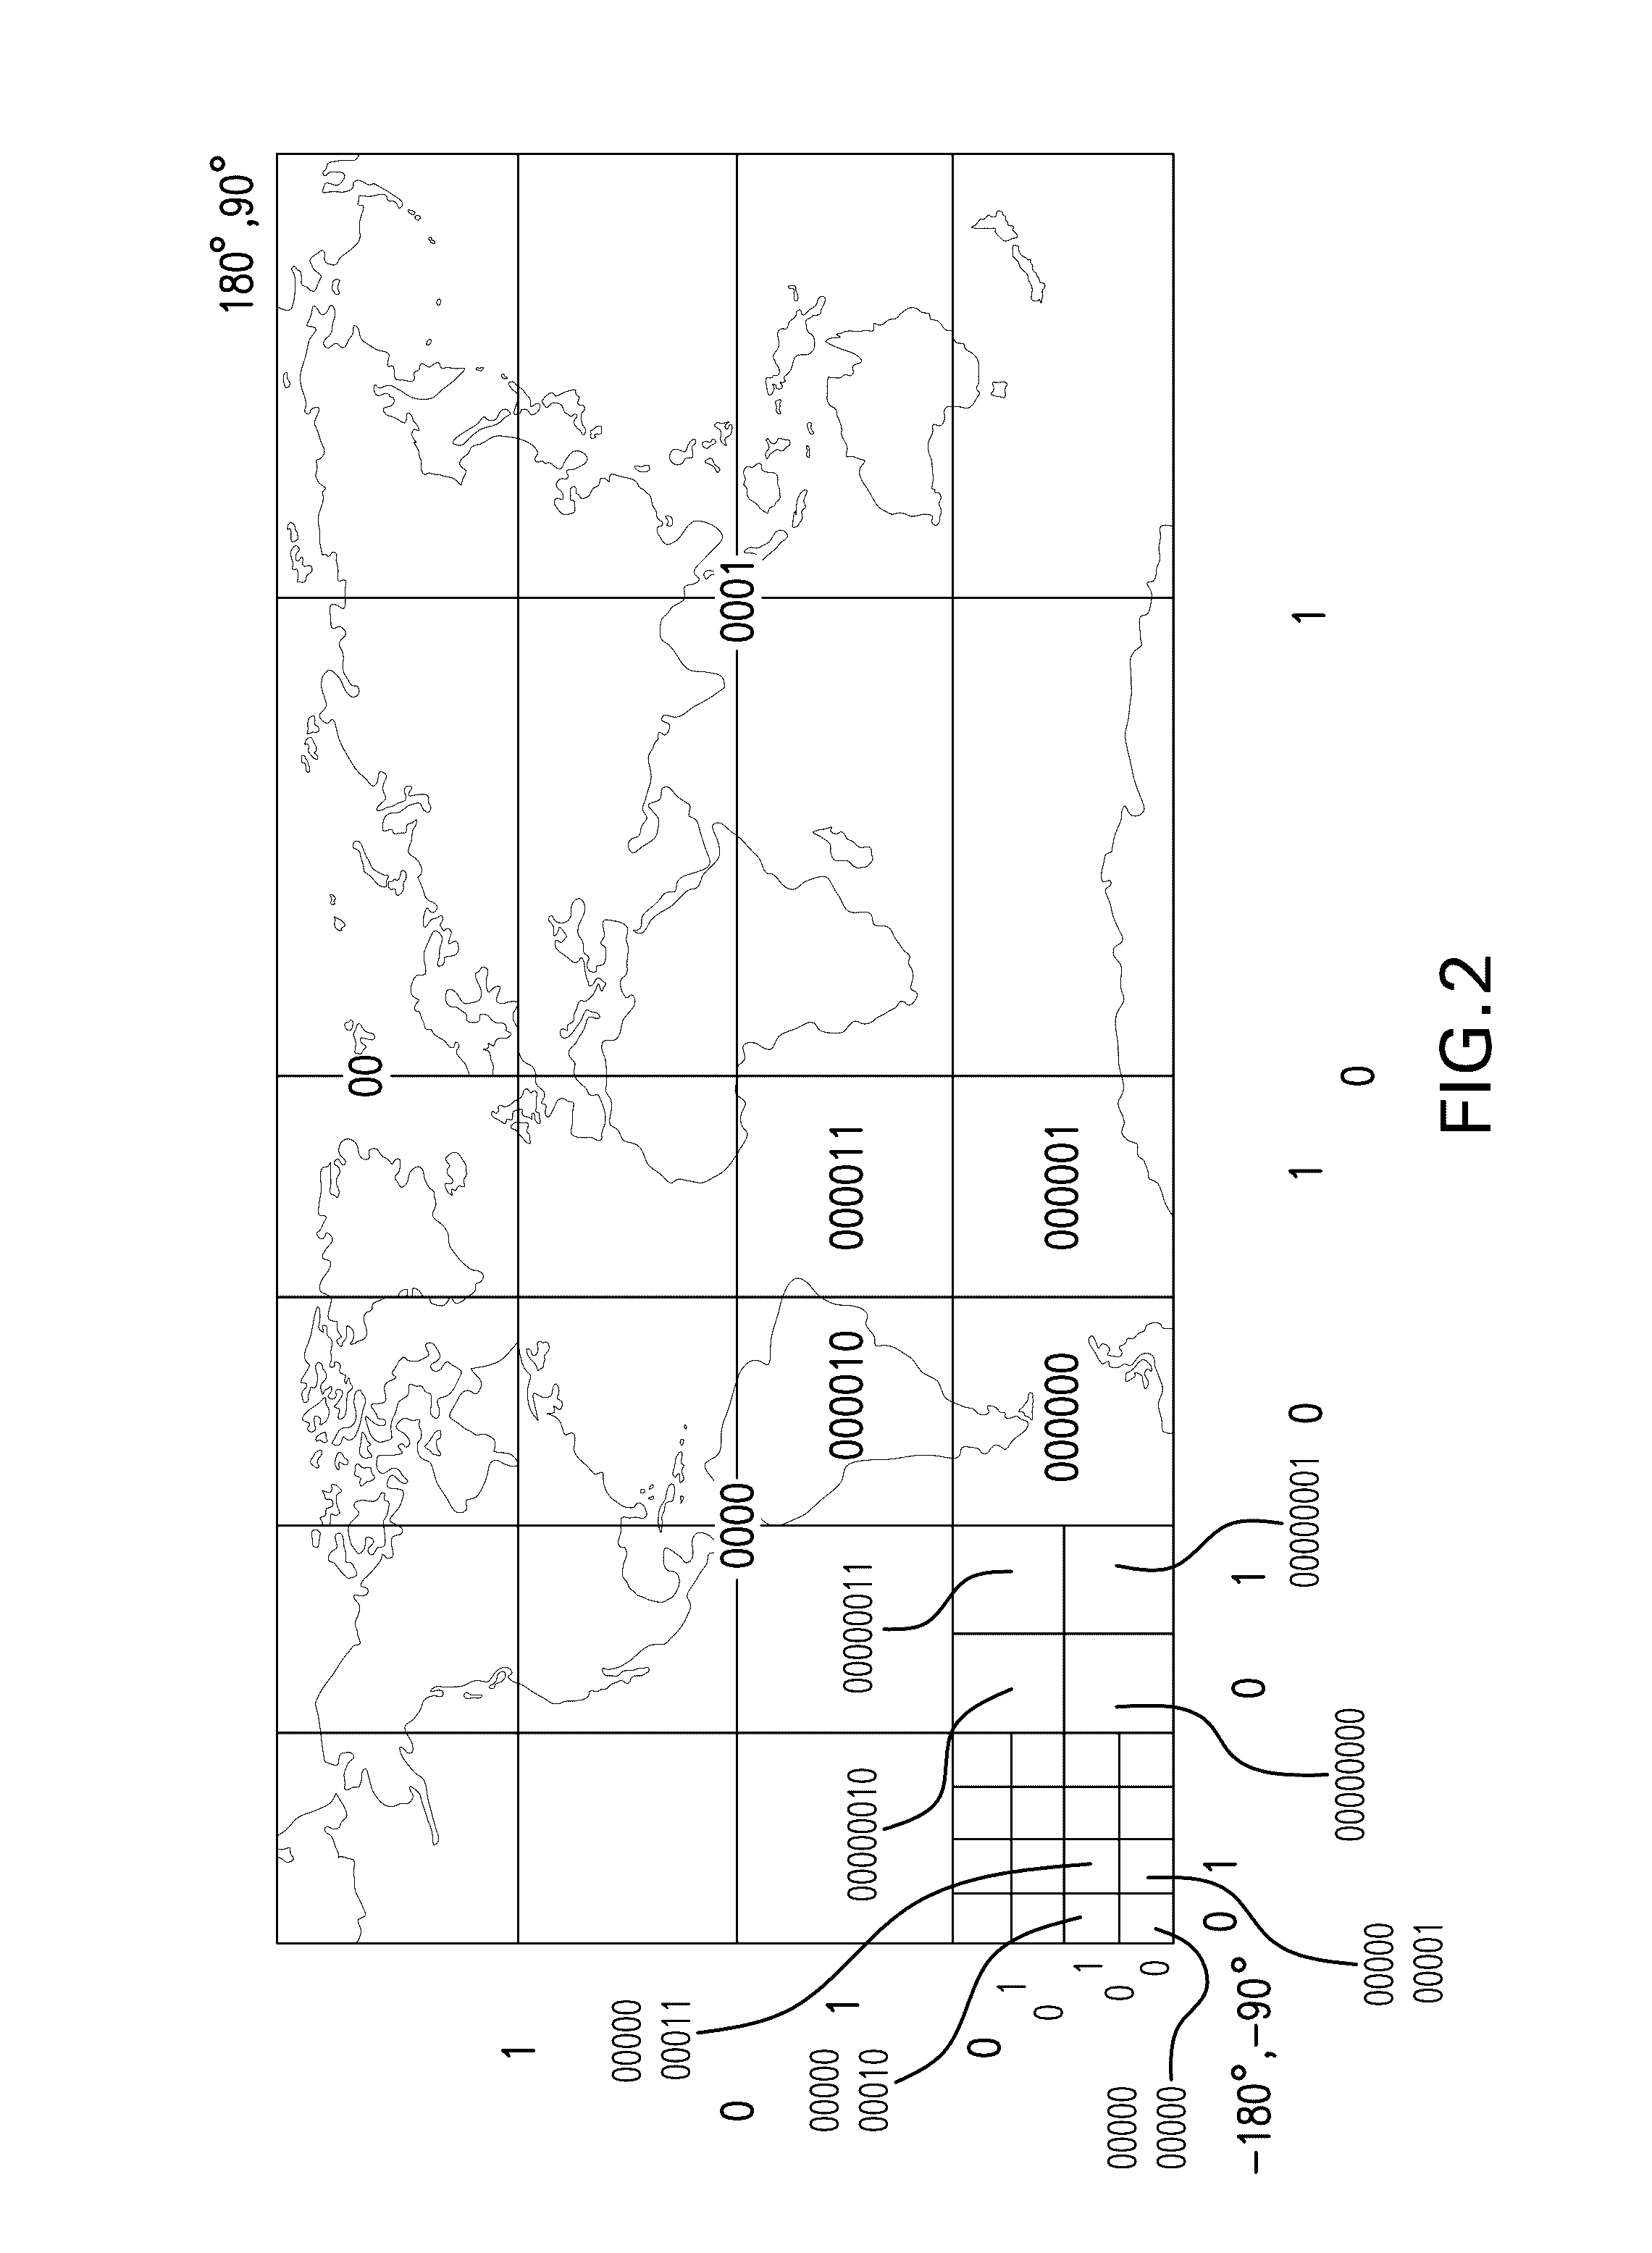 Parallel querying of adjustable resolution geospatial database